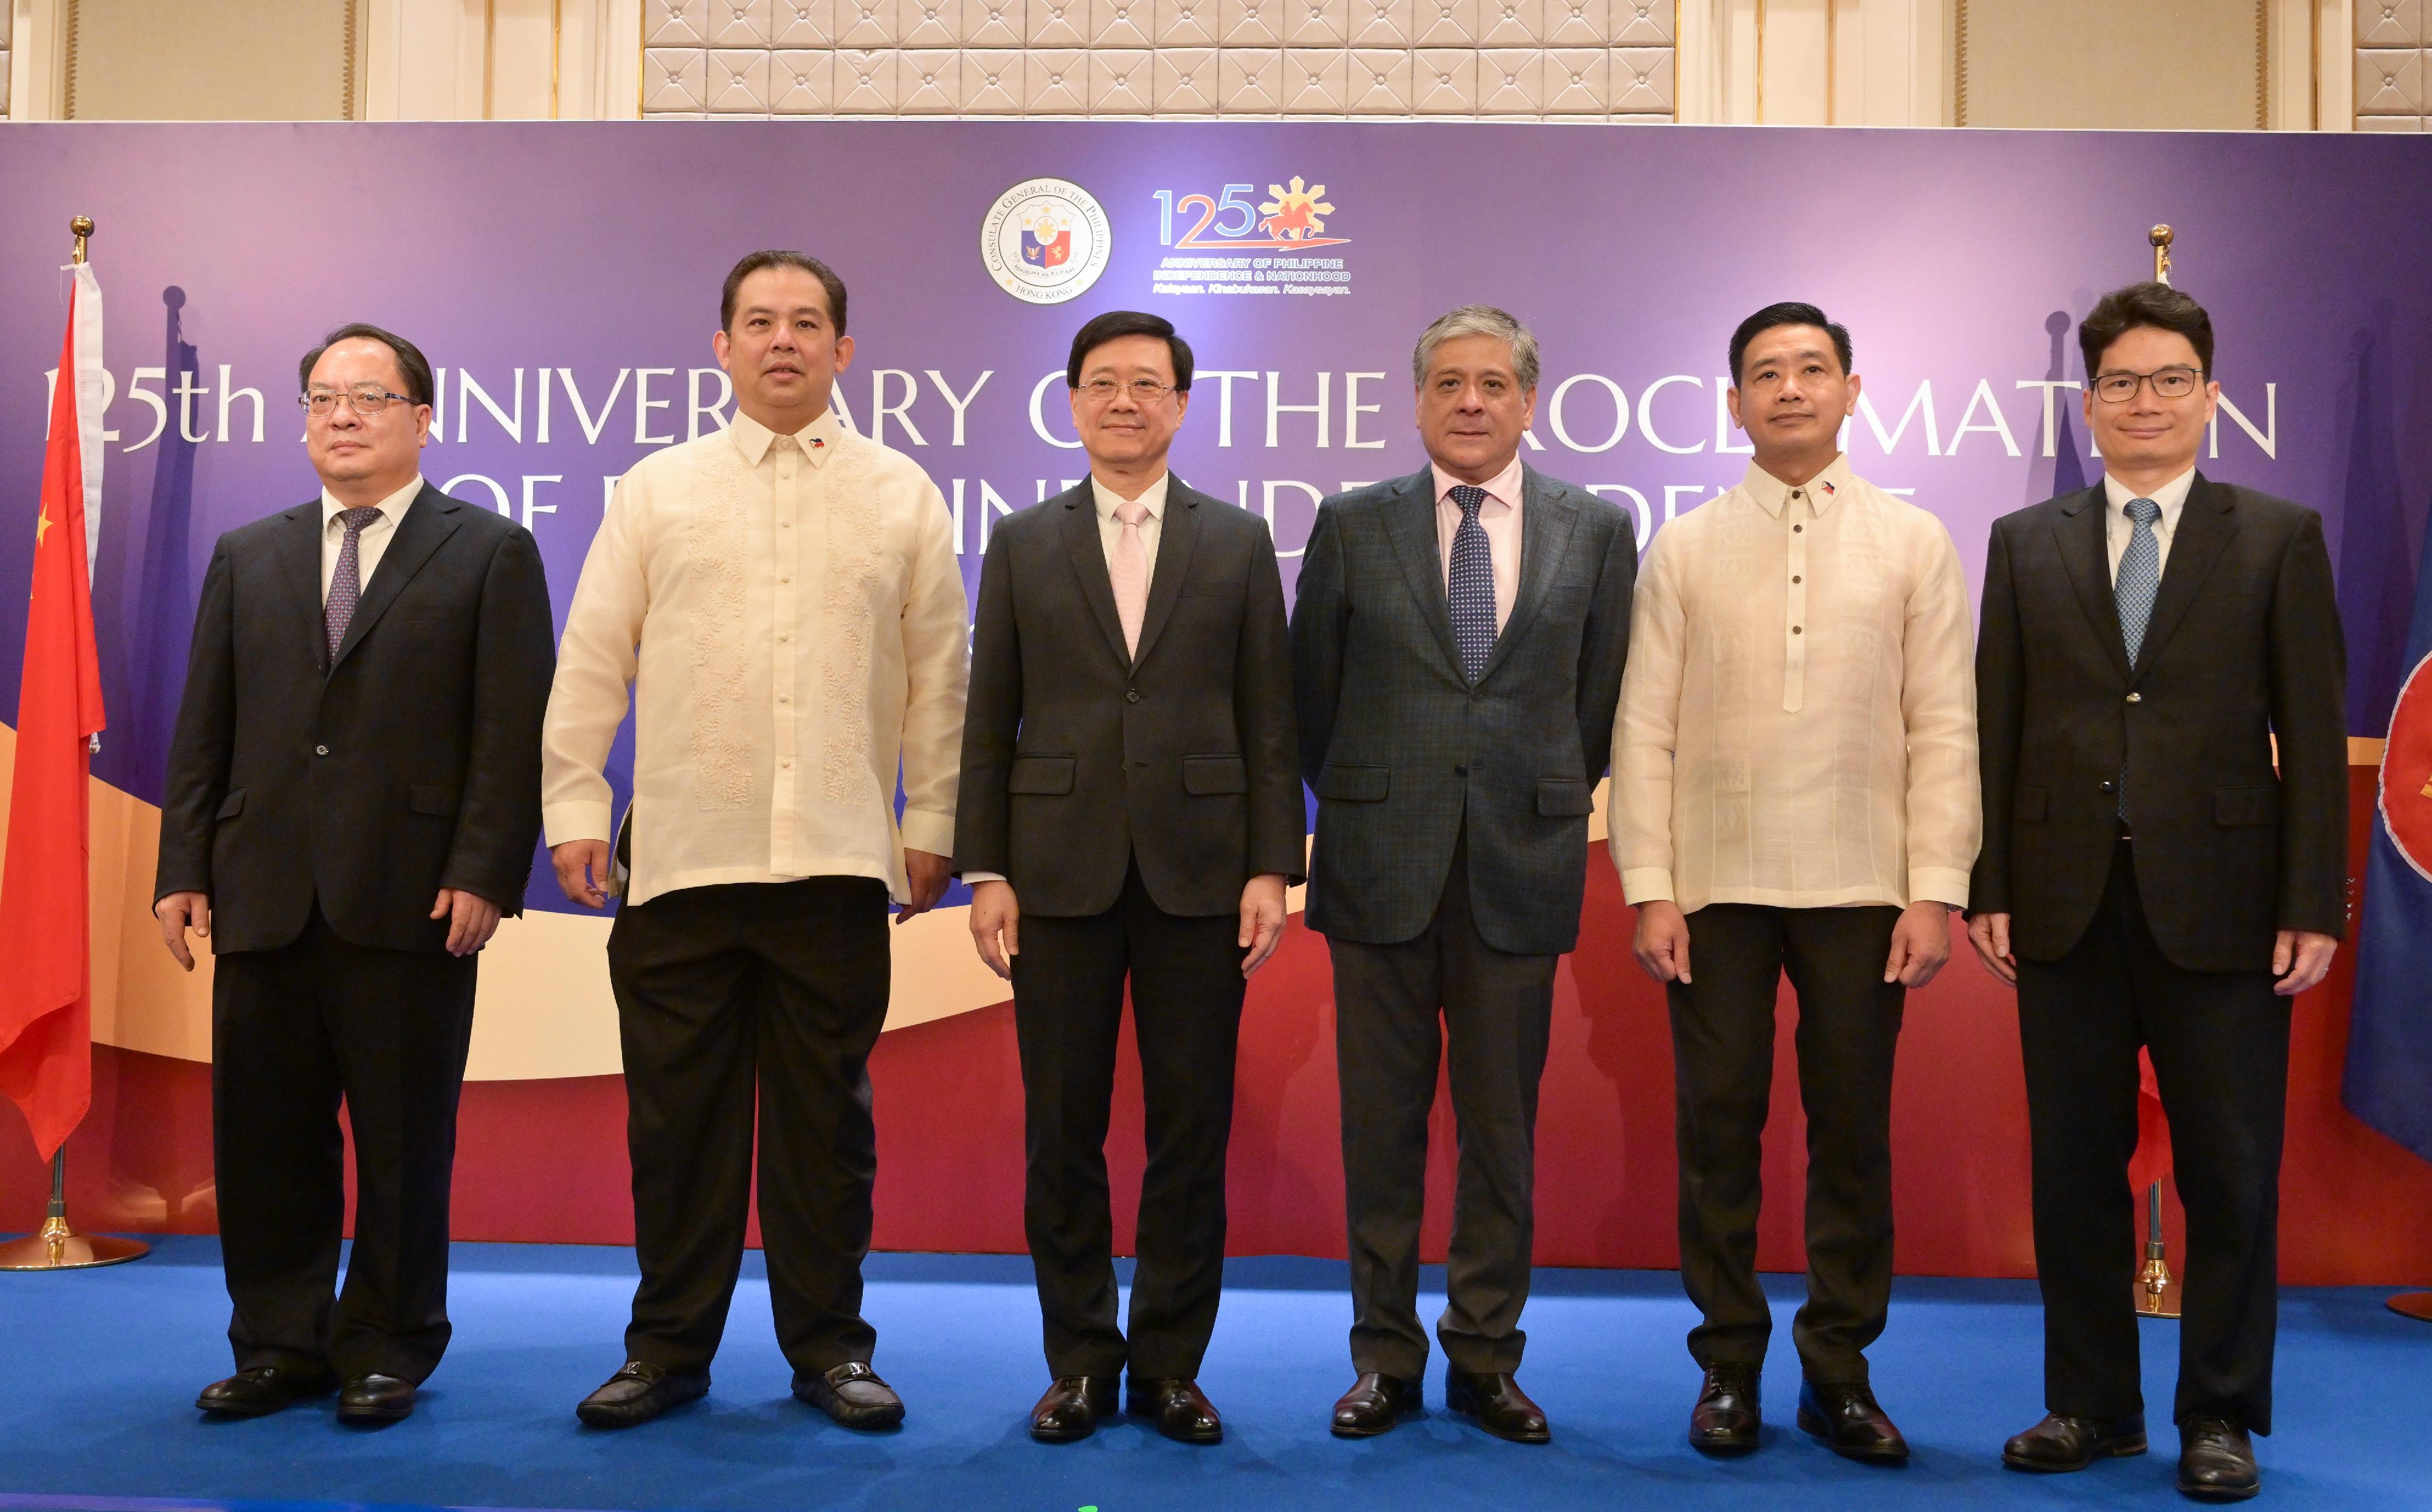 The Chief Executive, Mr John Lee, attended the Reception in Celebration of the 125th Anniversary of the Proclamation of the Philippine Independence today (June 9). Photo shows Mr Lee (third left); the Speaker of the House of Representatives of the Philippines, Mr Ferdinand Martin Romualdez (second left); the Consul-General of the Philippines in Hong Kong, Mr Raly Tejada (second right); Deputy Commissioner of the Office of the Commissioner of the Ministry of Foreign Affairs of the People's Republic of China in the Hong Kong Special Administrative Region Mr Pan Yundong (first left), and other guests at the reception.
